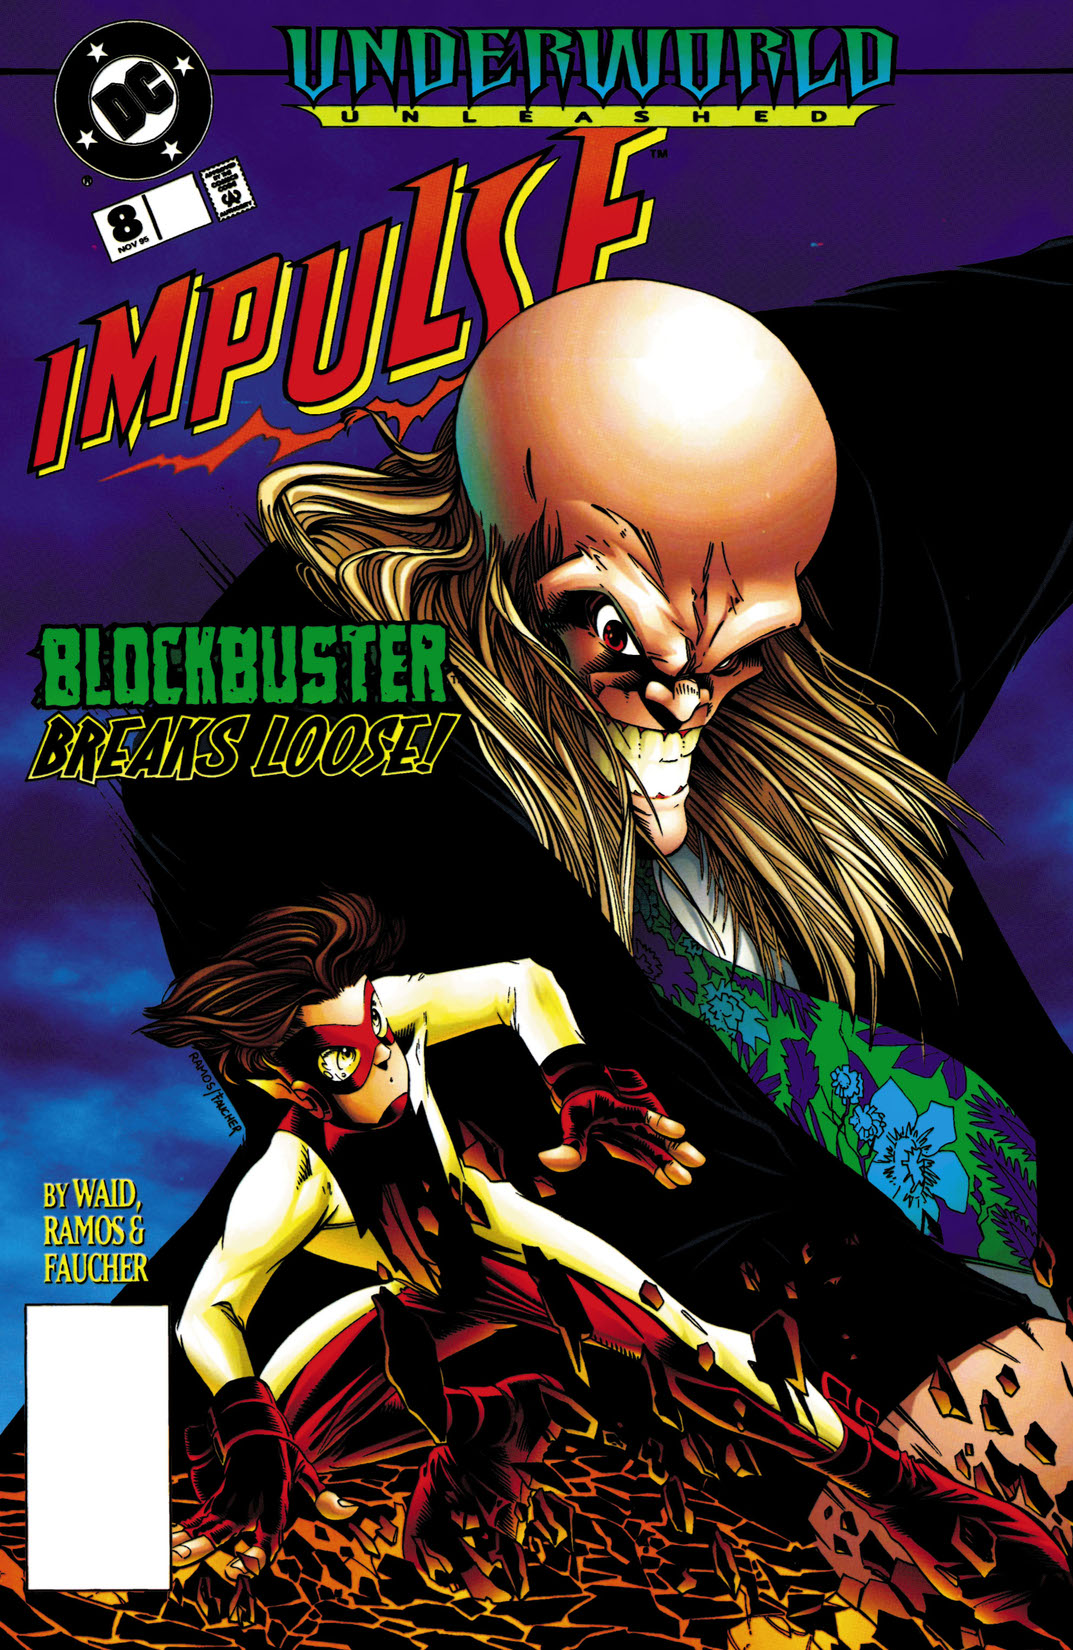 Impulse #8 preview images